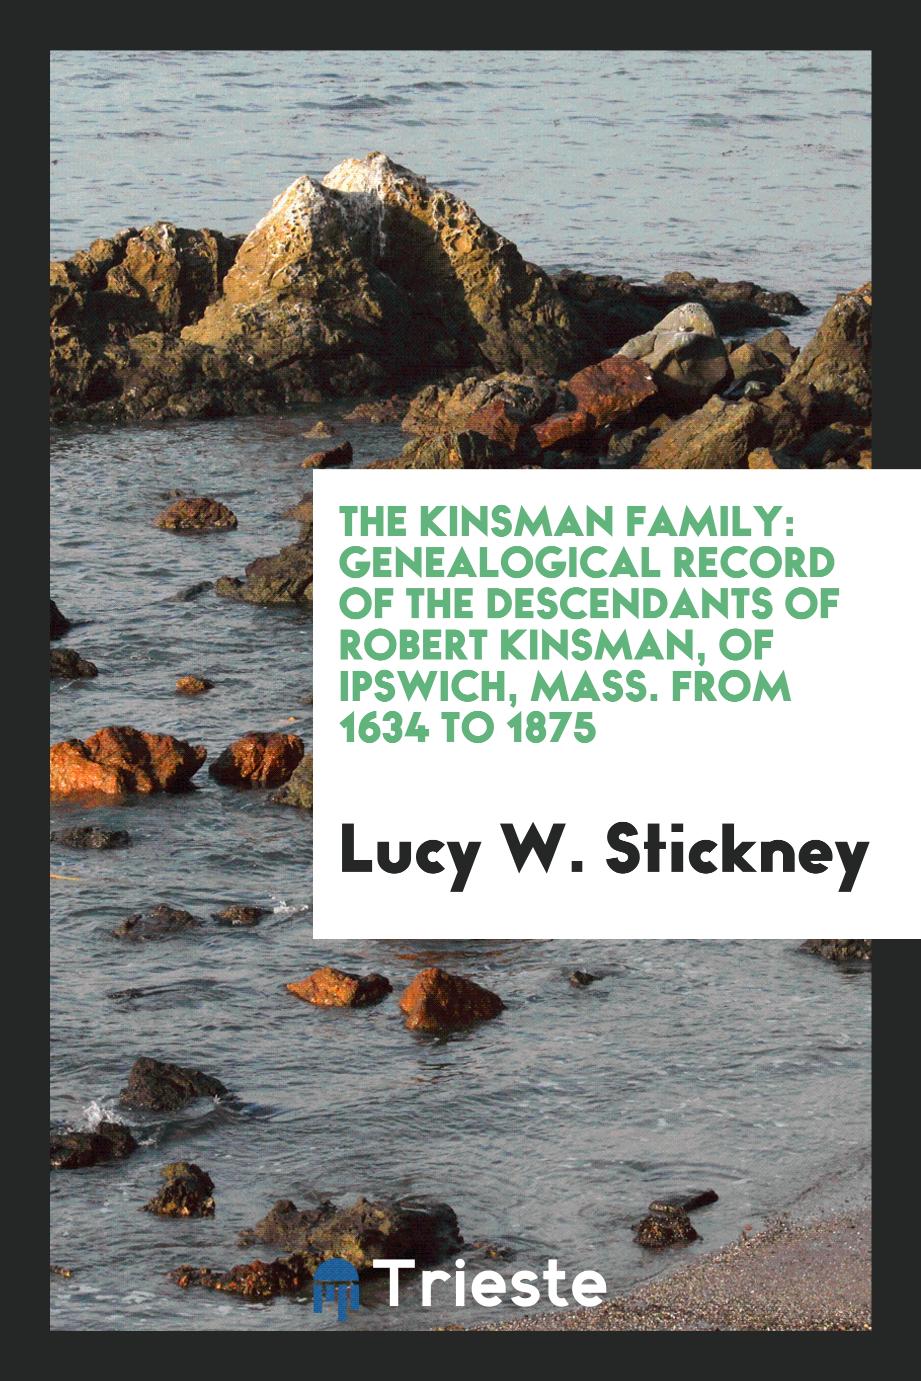 The Kinsman Family: Genealogical Record of the Descendants of Robert Kinsman, of Ipswich, Mass. From 1634 to 1875